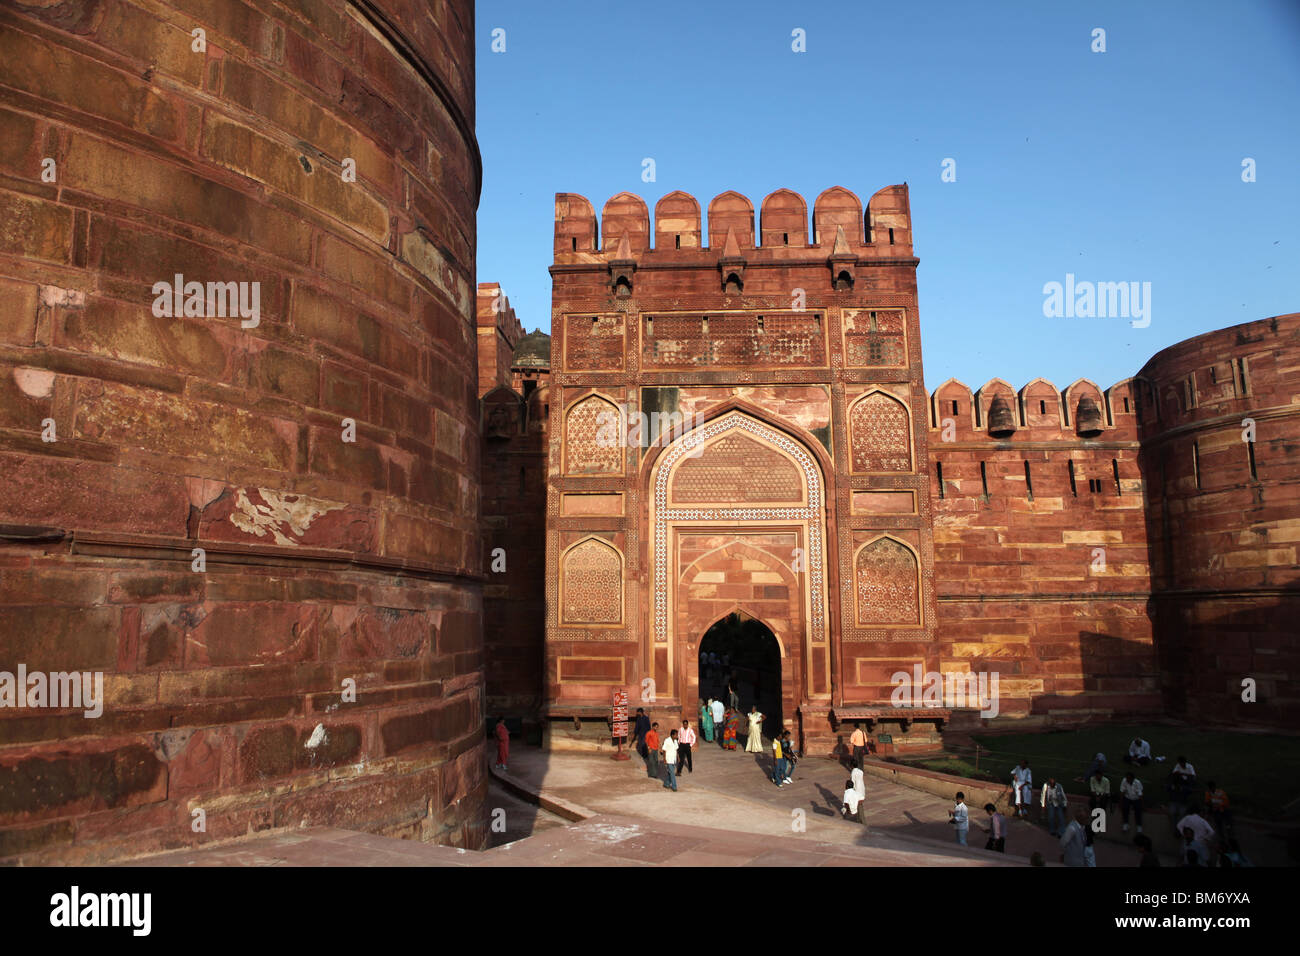 The main gate to the Red Fort in Delhi in India. Stock Photo